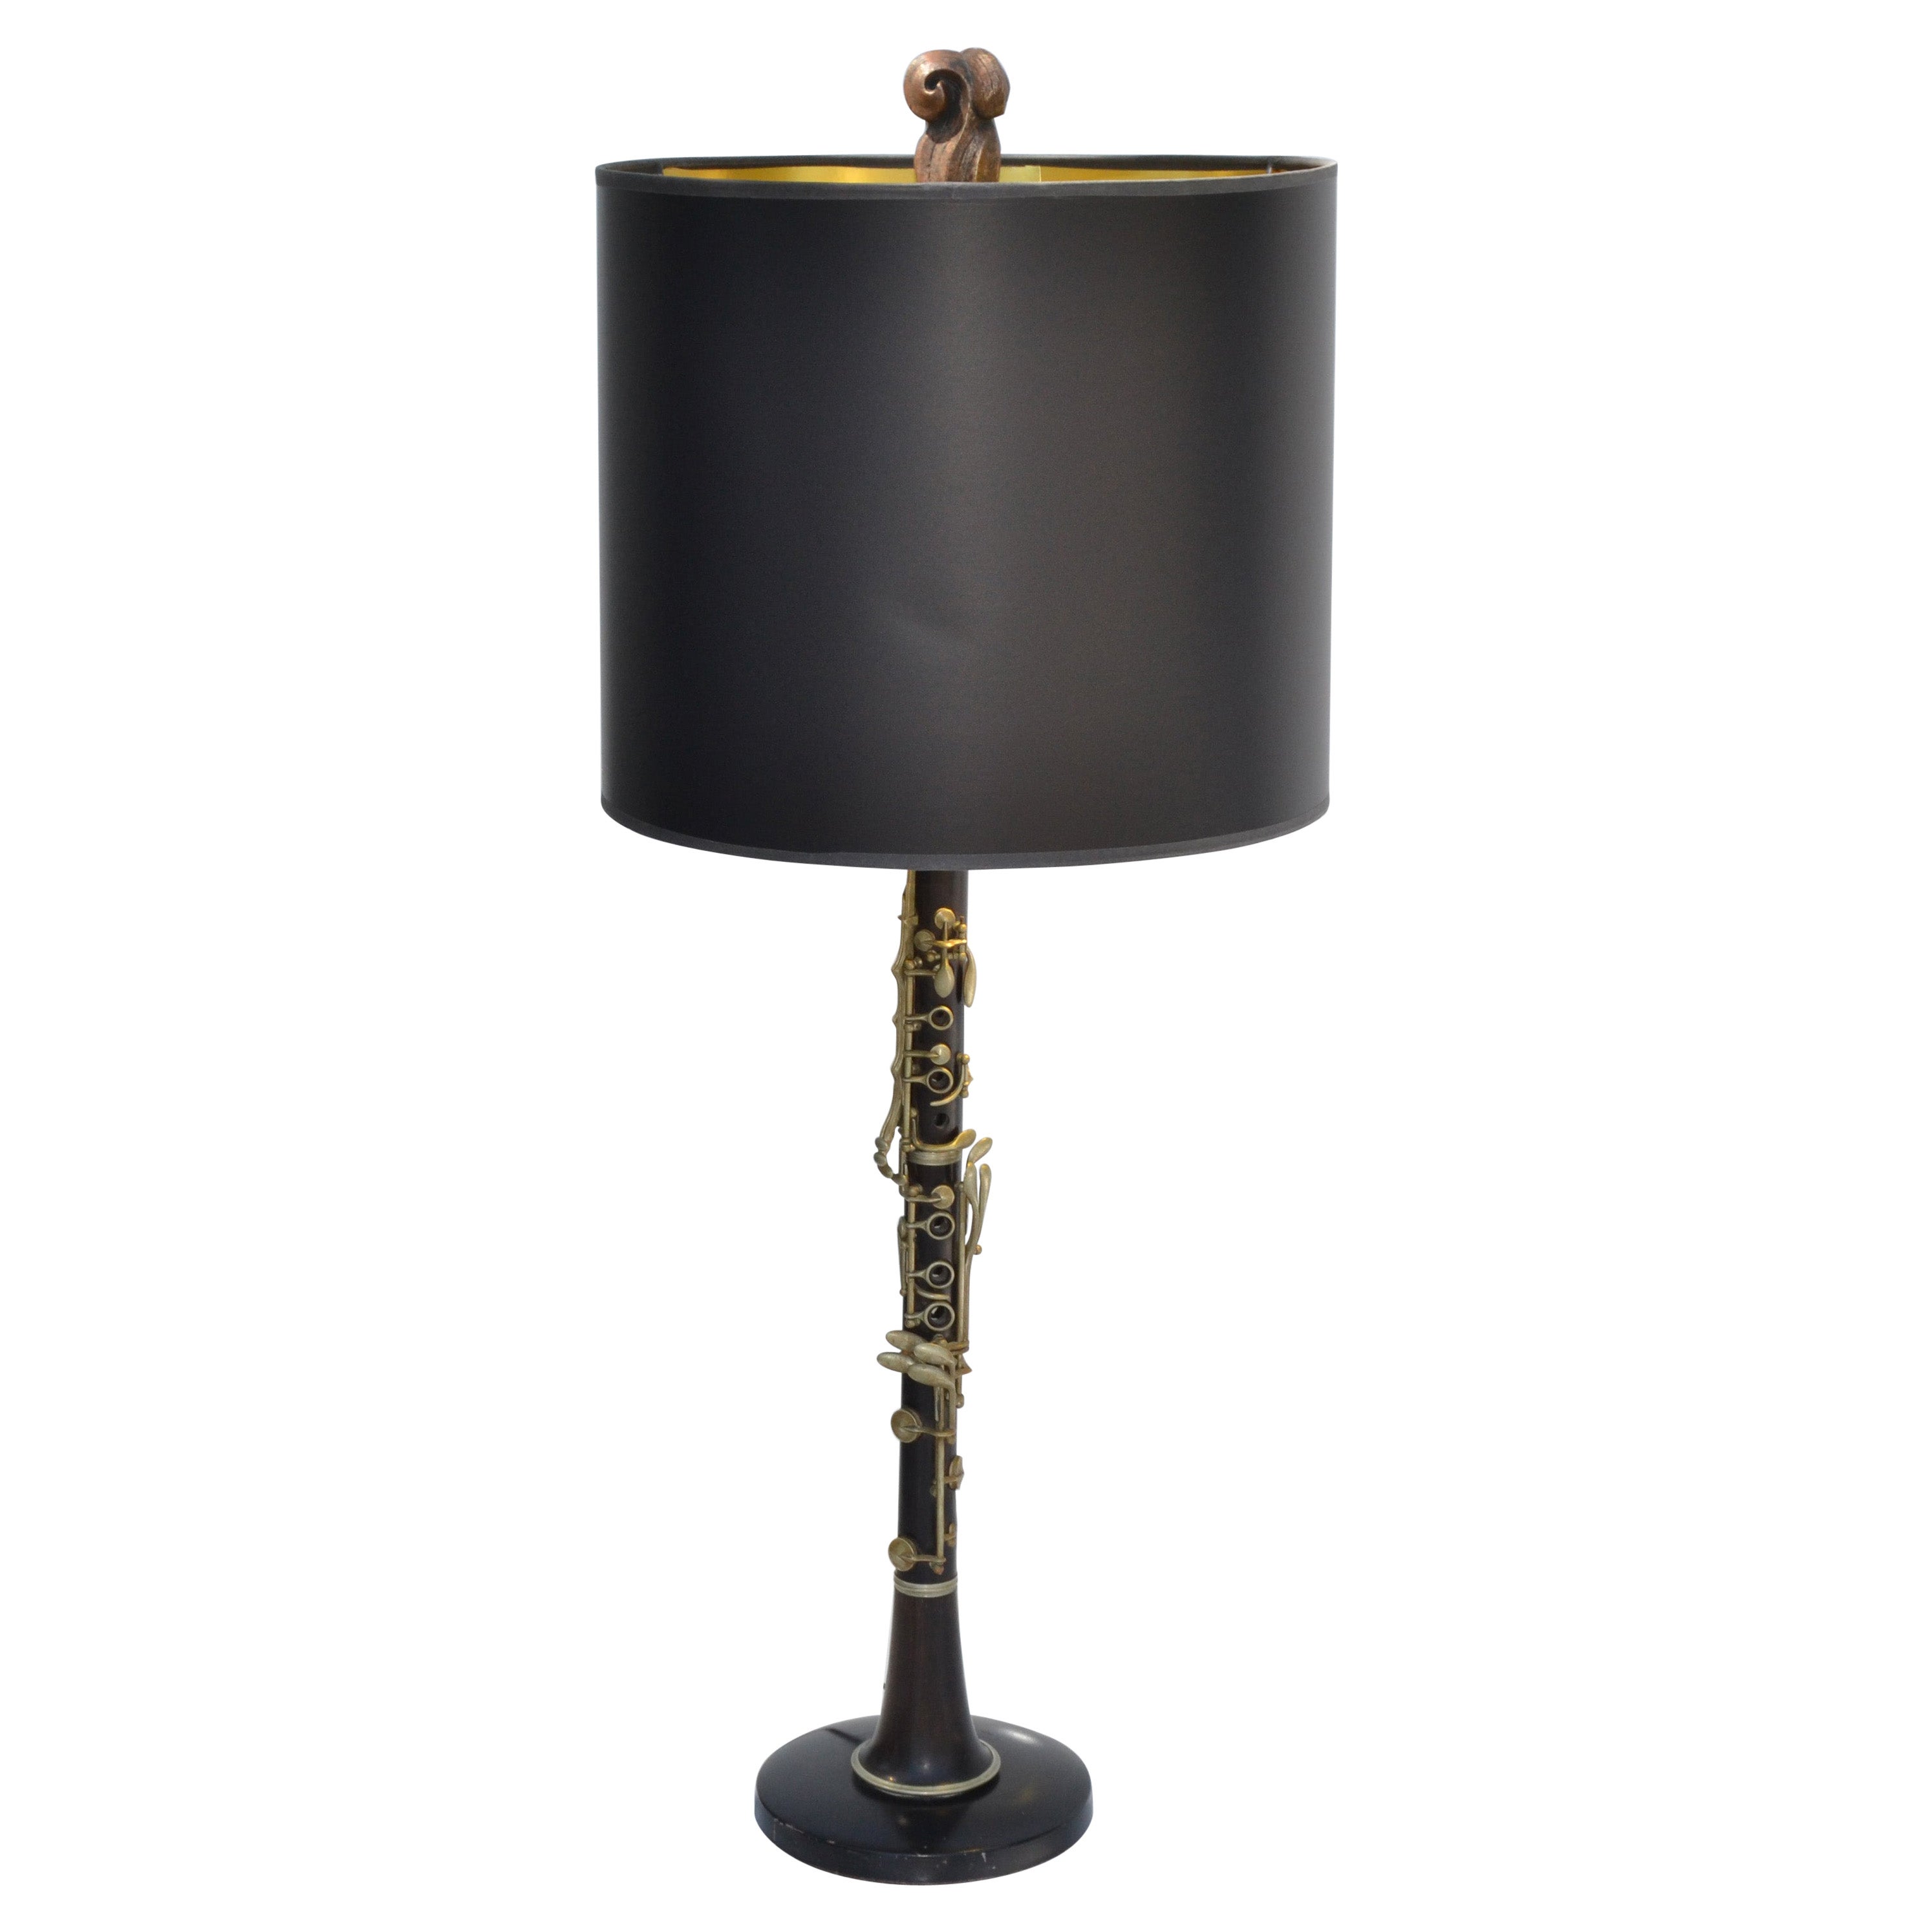 French Neoclassical Clarinet Wood Brass & Metal Table Lamp Black Gold Drum Shade